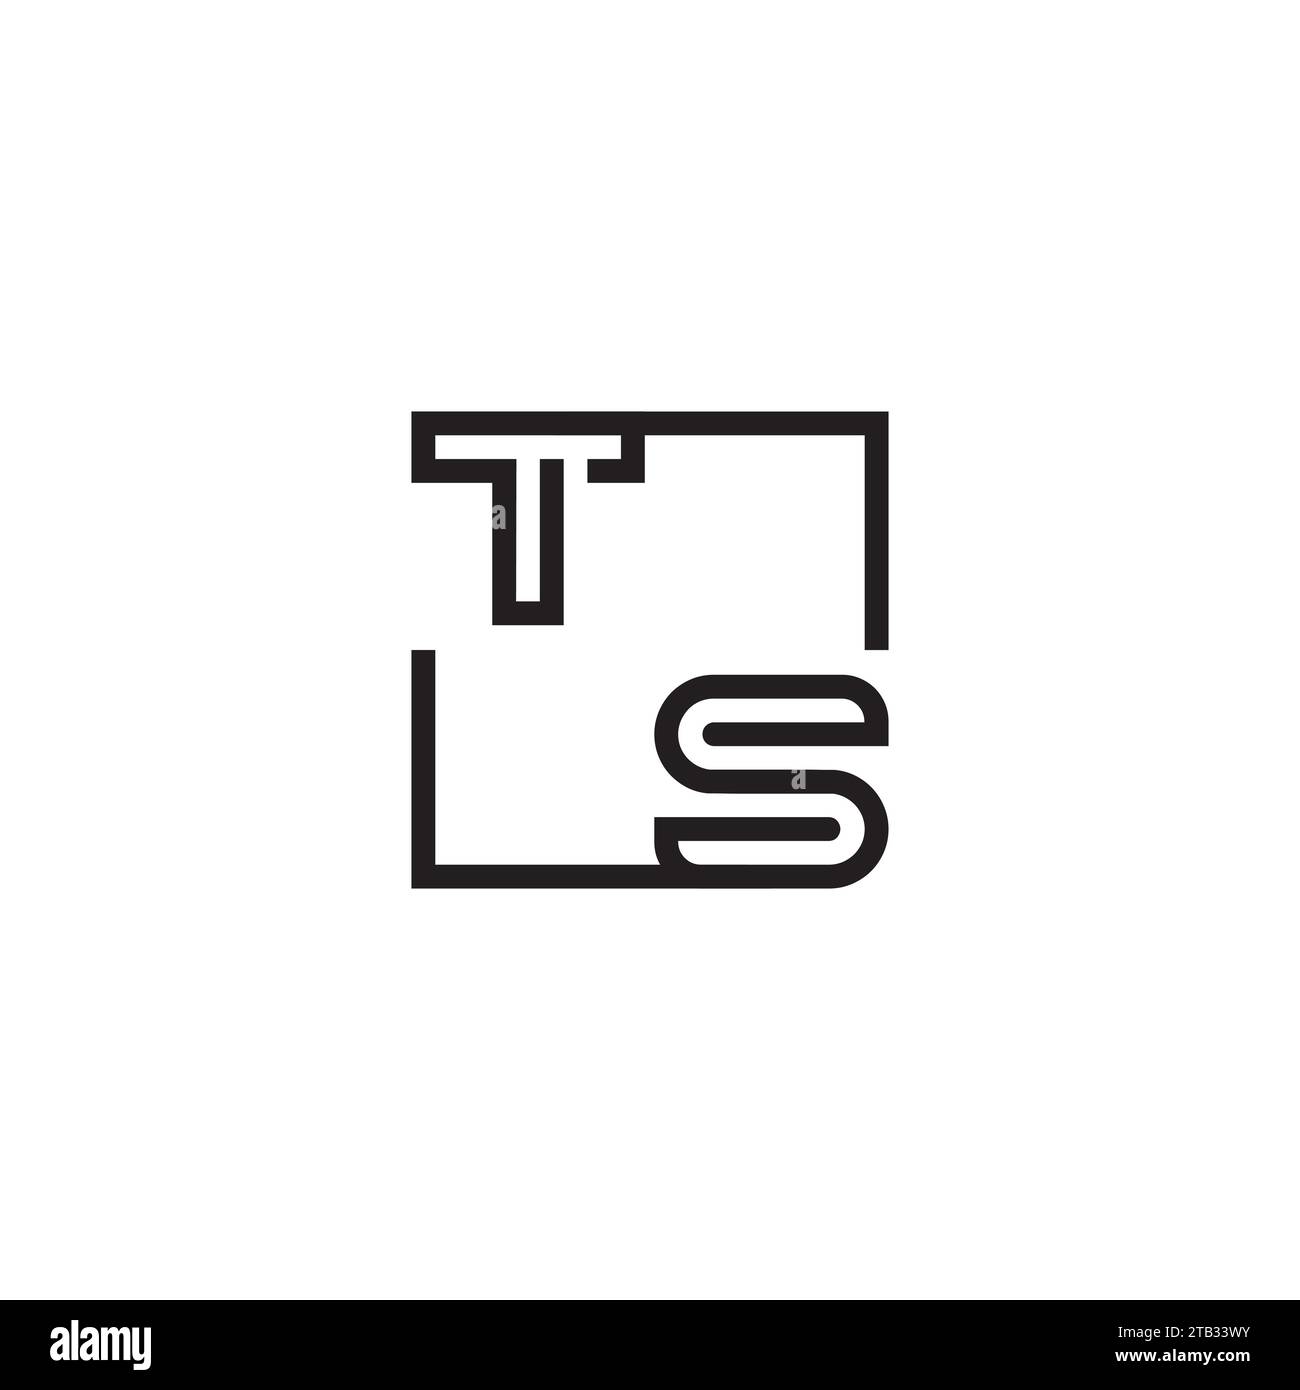 TS initial logo letters in high quality professional design that will print well across any print media Stock Vector